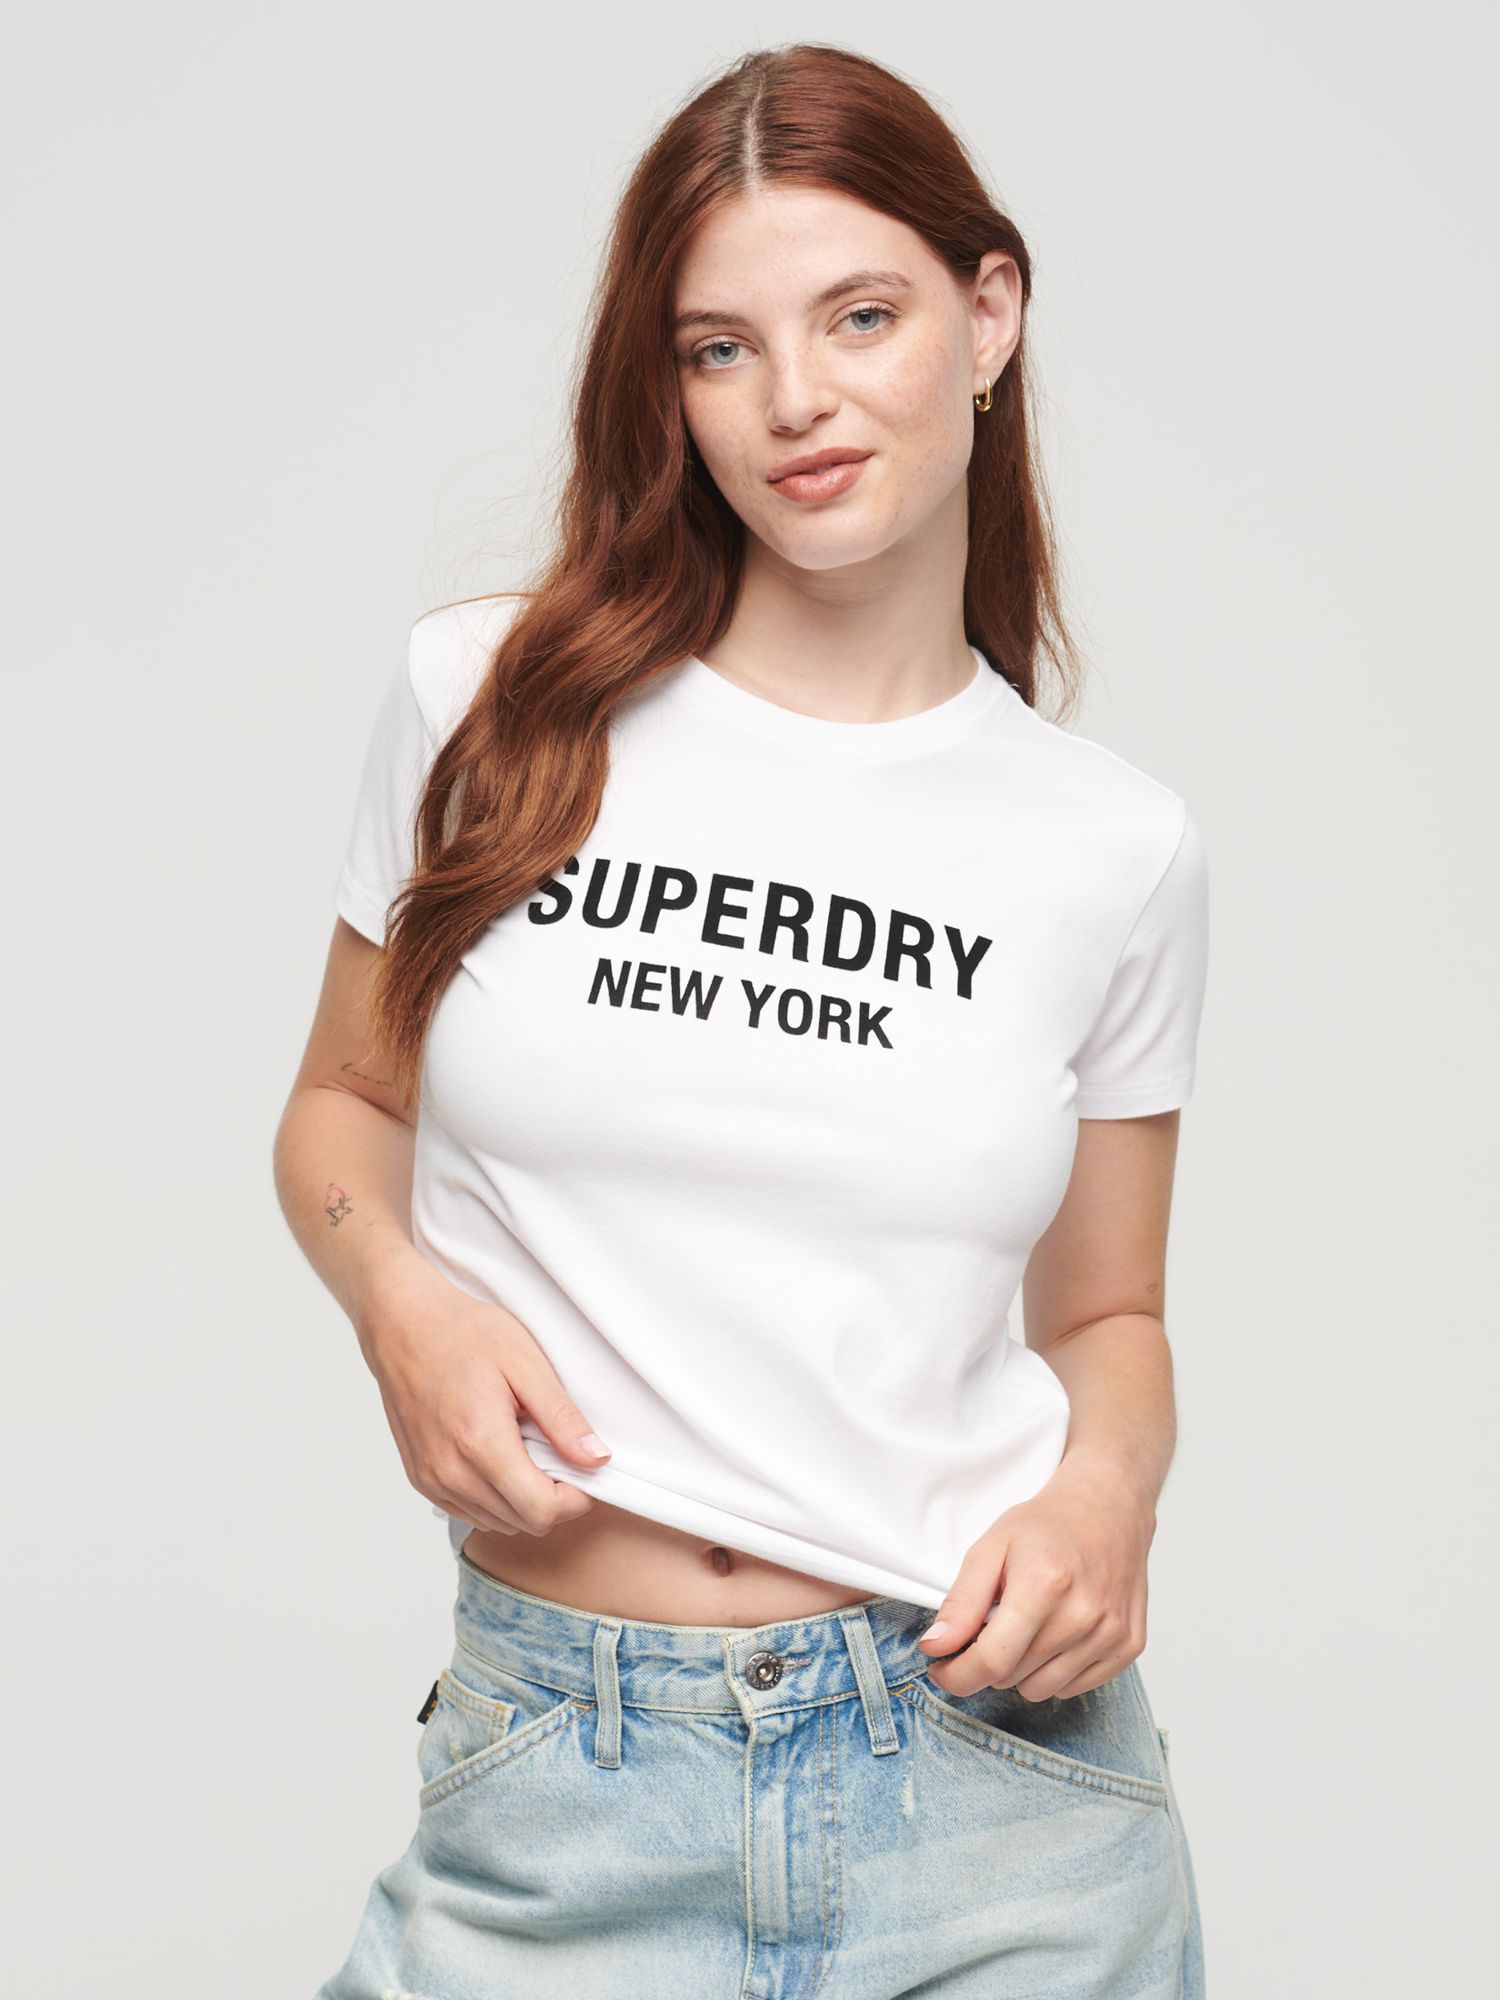 Superdry Sport Luxe Logo Fitted Cropped T-Shirt, White/Black, 12